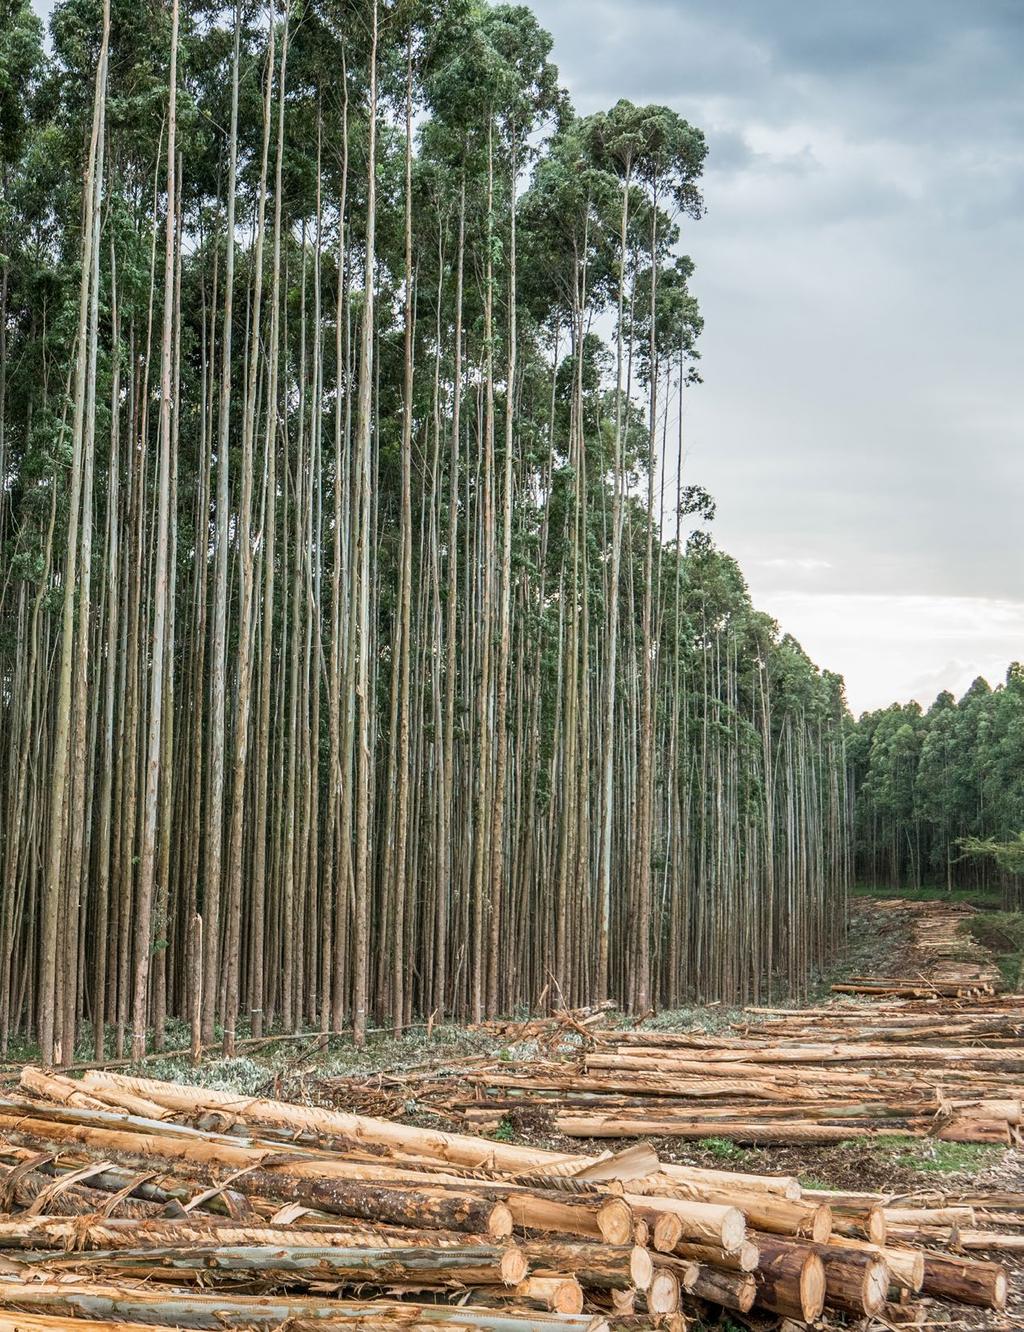 Global deforestation is accelerating. Extractive industries and land conversion for agricultural products like beef, soy, palm oil, and pulp and paper are driving tropical deforestation.